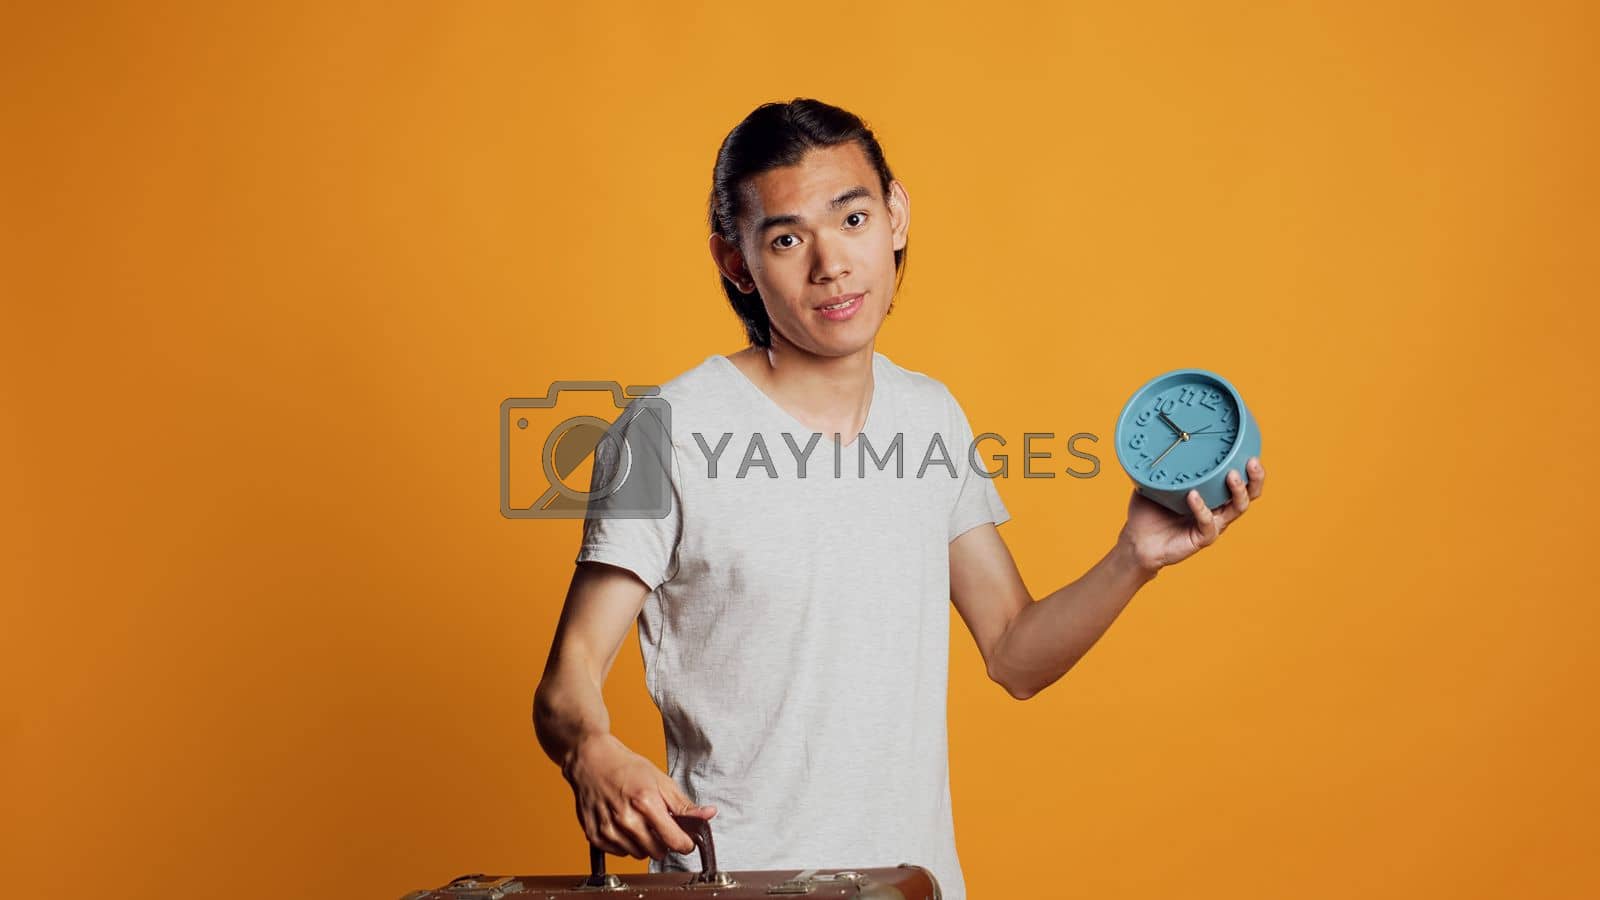 Royalty free image of Male person carrying suitcase and checking time on clock by DCStudio